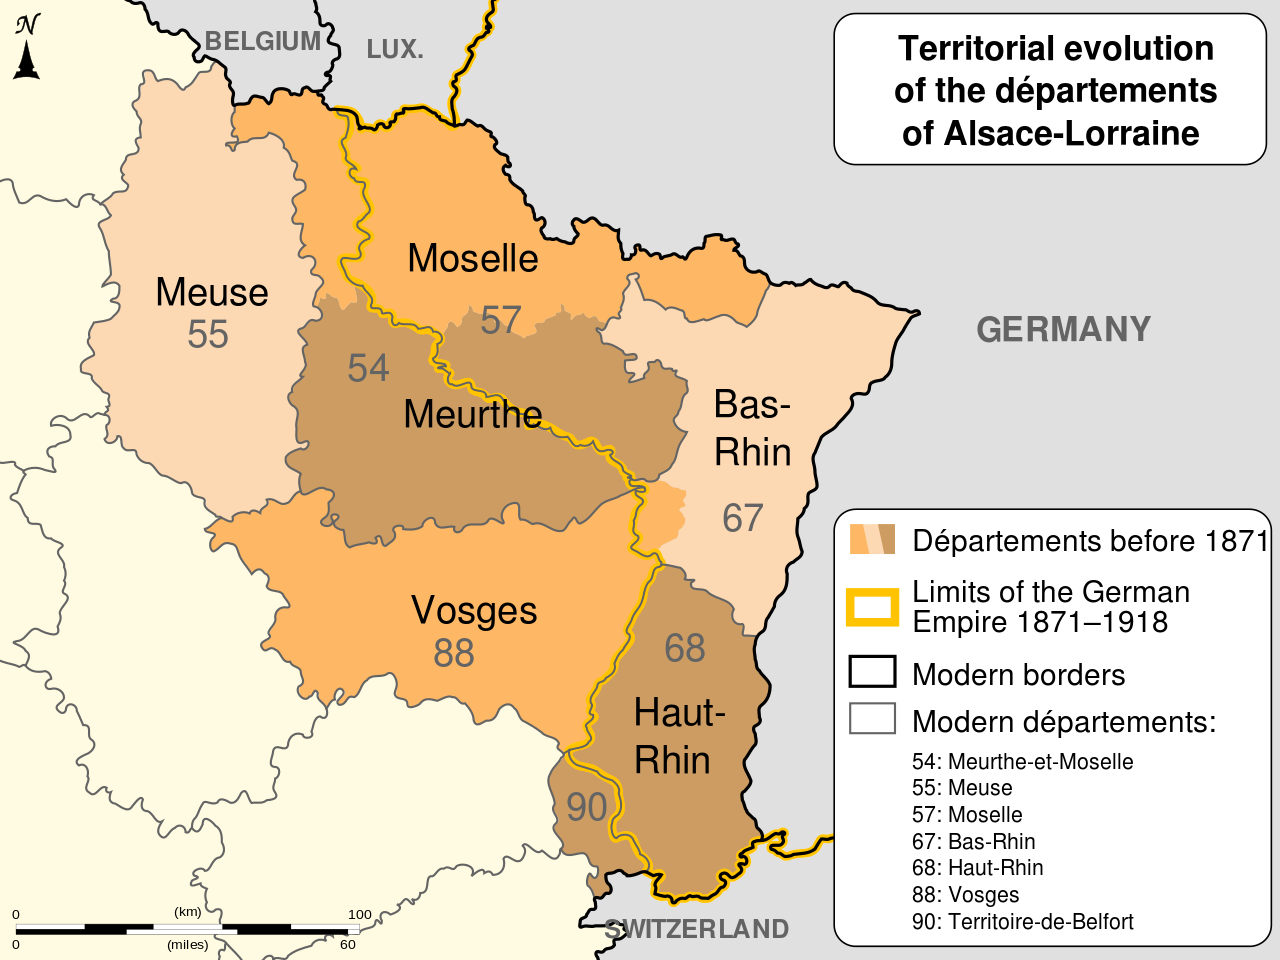 Départements of Alsace-Lorraine before and after 1871